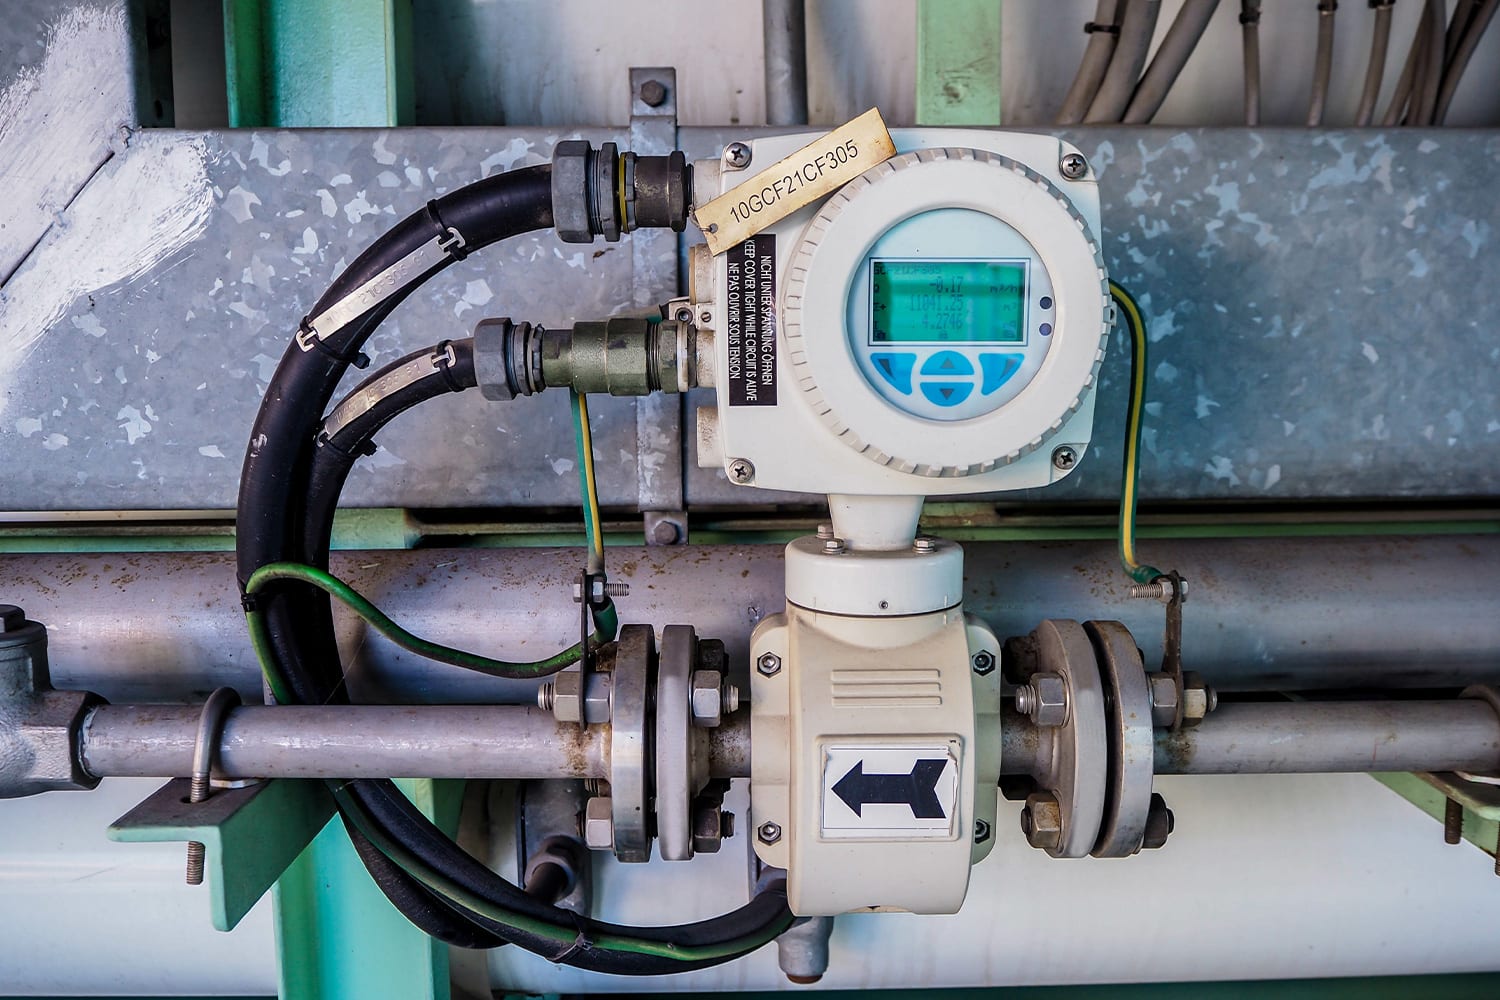 SBT Alliance helps businesses deploy IoT-enabled water pressure flow management & monitoring technologies to improve operational efficiencies & realize cost savings.